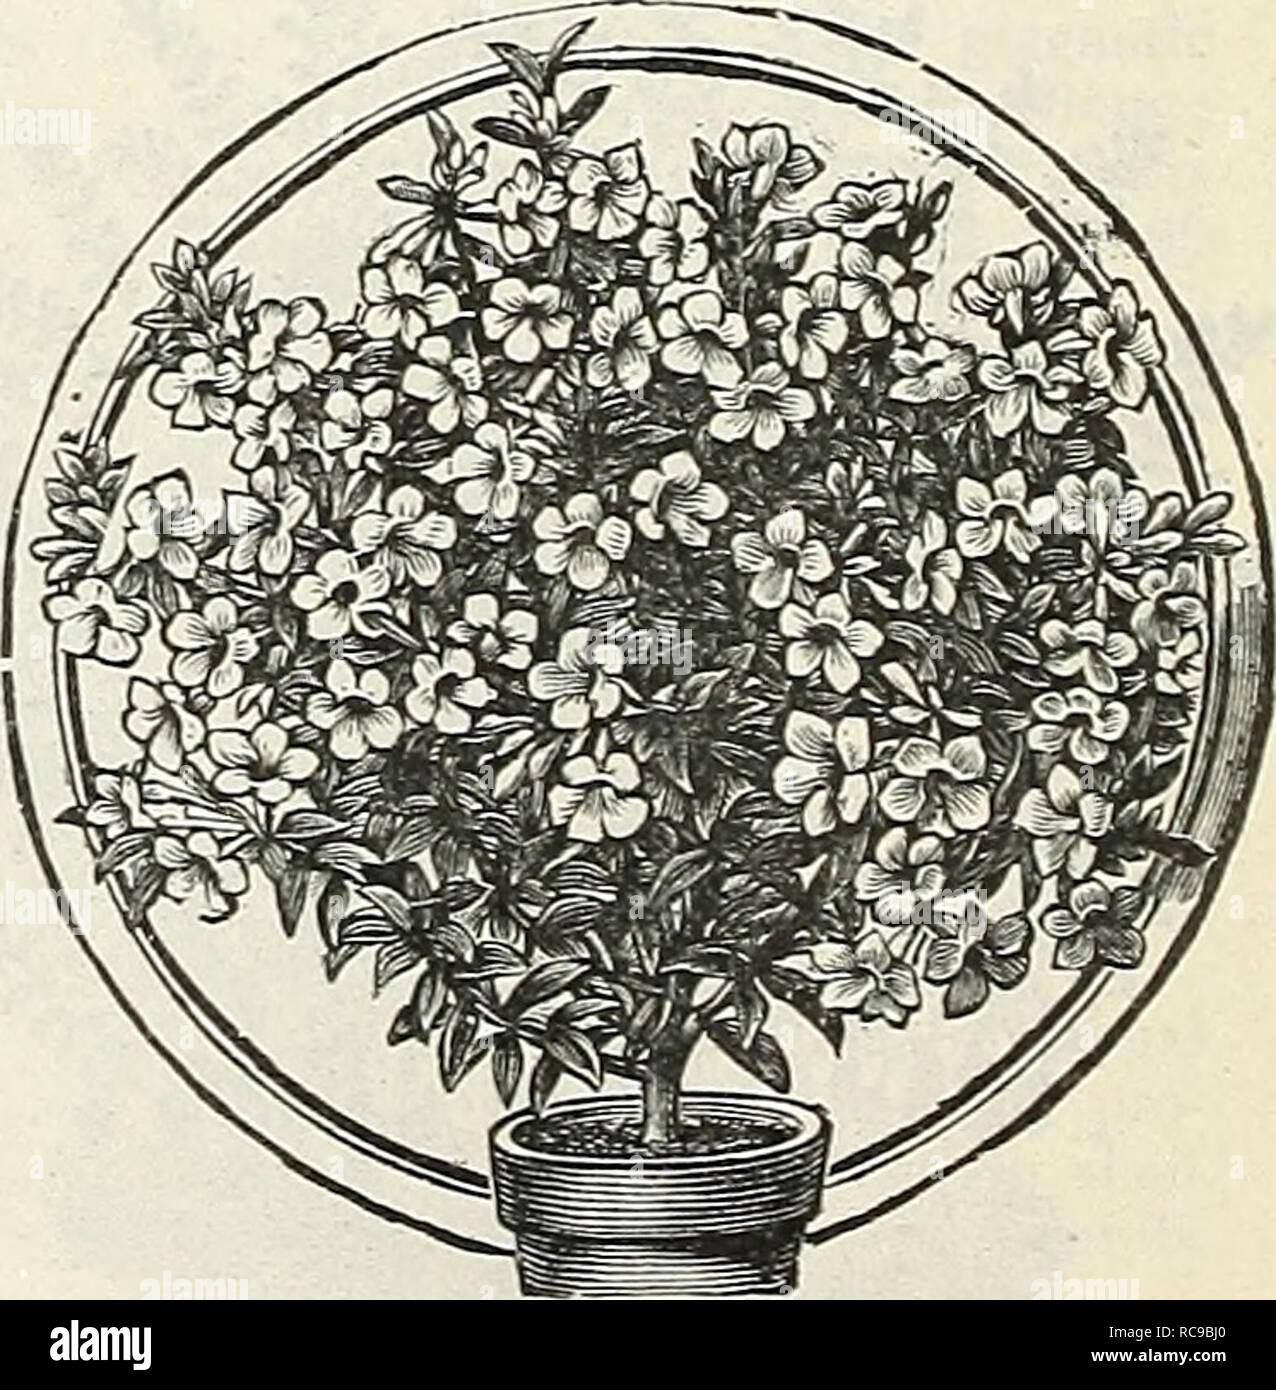 . Dreer's garden book : 1905. Seeds Catalogs; Nursery stock Catalogs; Gardening Equipment and supplies Catalogs; Flowers Seeds Catalogs; Vegetables Seeds Catalogs; Fruit Seeds Catalogs. Abelia Flohibunda, AEOCASIAS. Beautiful subjects for the warm con- servatory, with shovvy, ornamental foliage ; invaluable as exhibition plants. Macrohiza Variegata. A strong grower, with large, bright green leaves, . margins slightly waved, blotched and marbled with white. SI.00 each. Illustris. Excellent to grow in con- nection with fancy-leaved Caladiums, or for planting out of doors in a shad- ed position.  Stock Photo